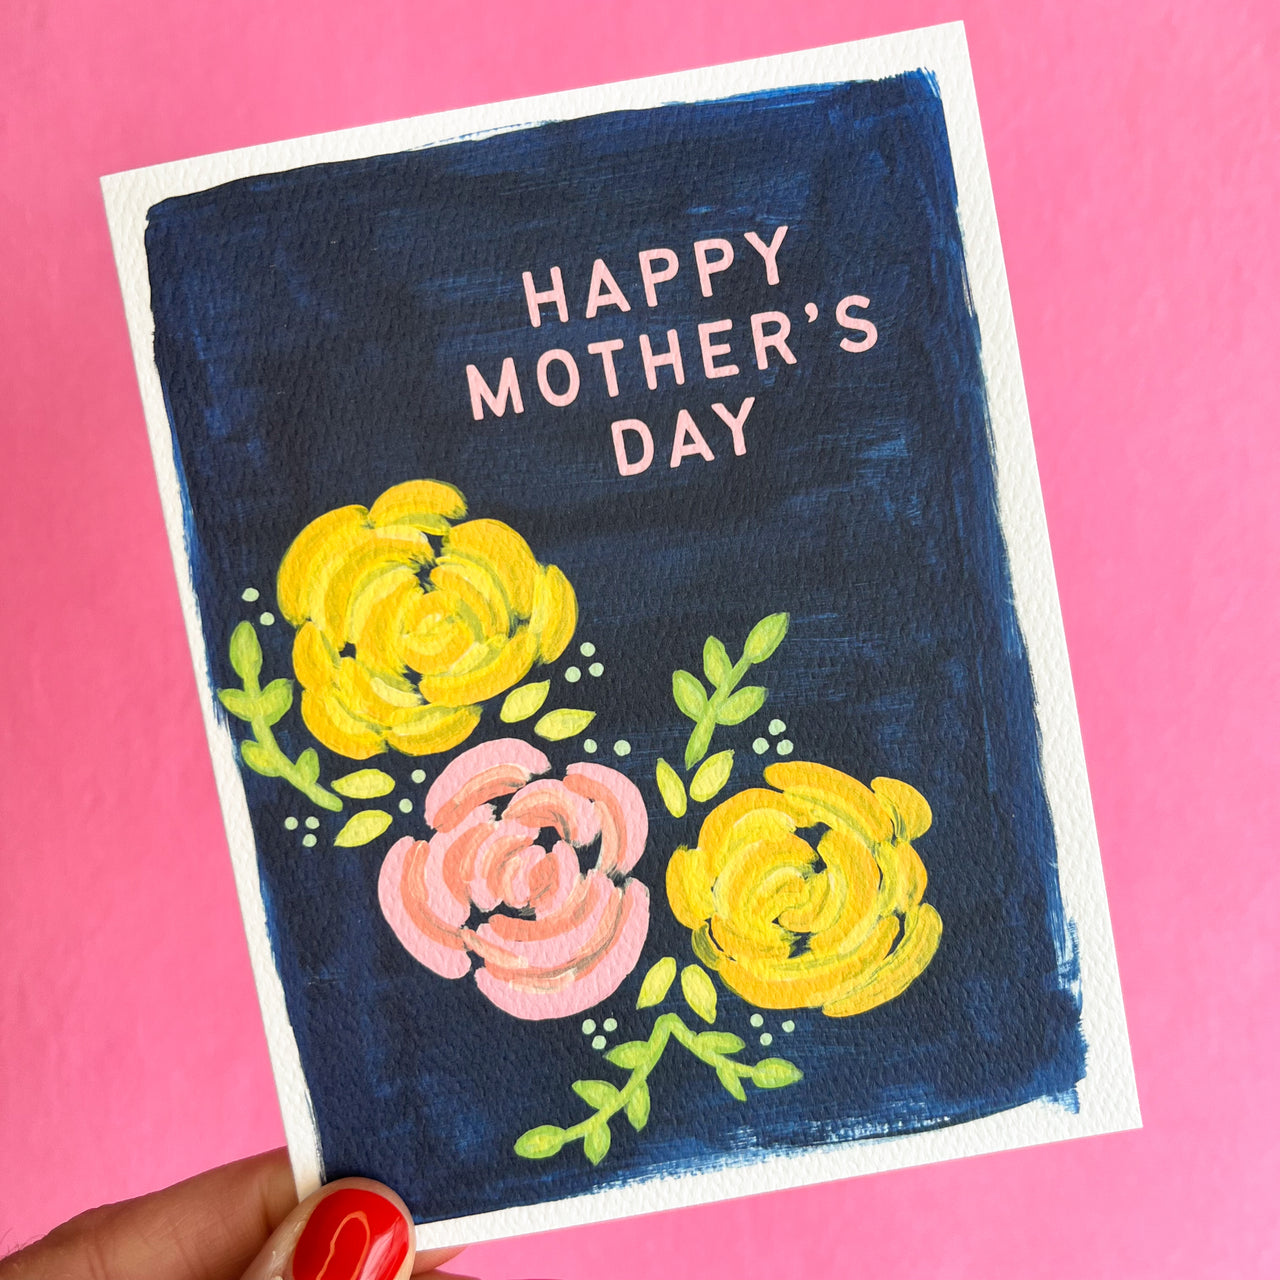 Happy Mother's Day Navy Floral Greeting Card by Gert & Co